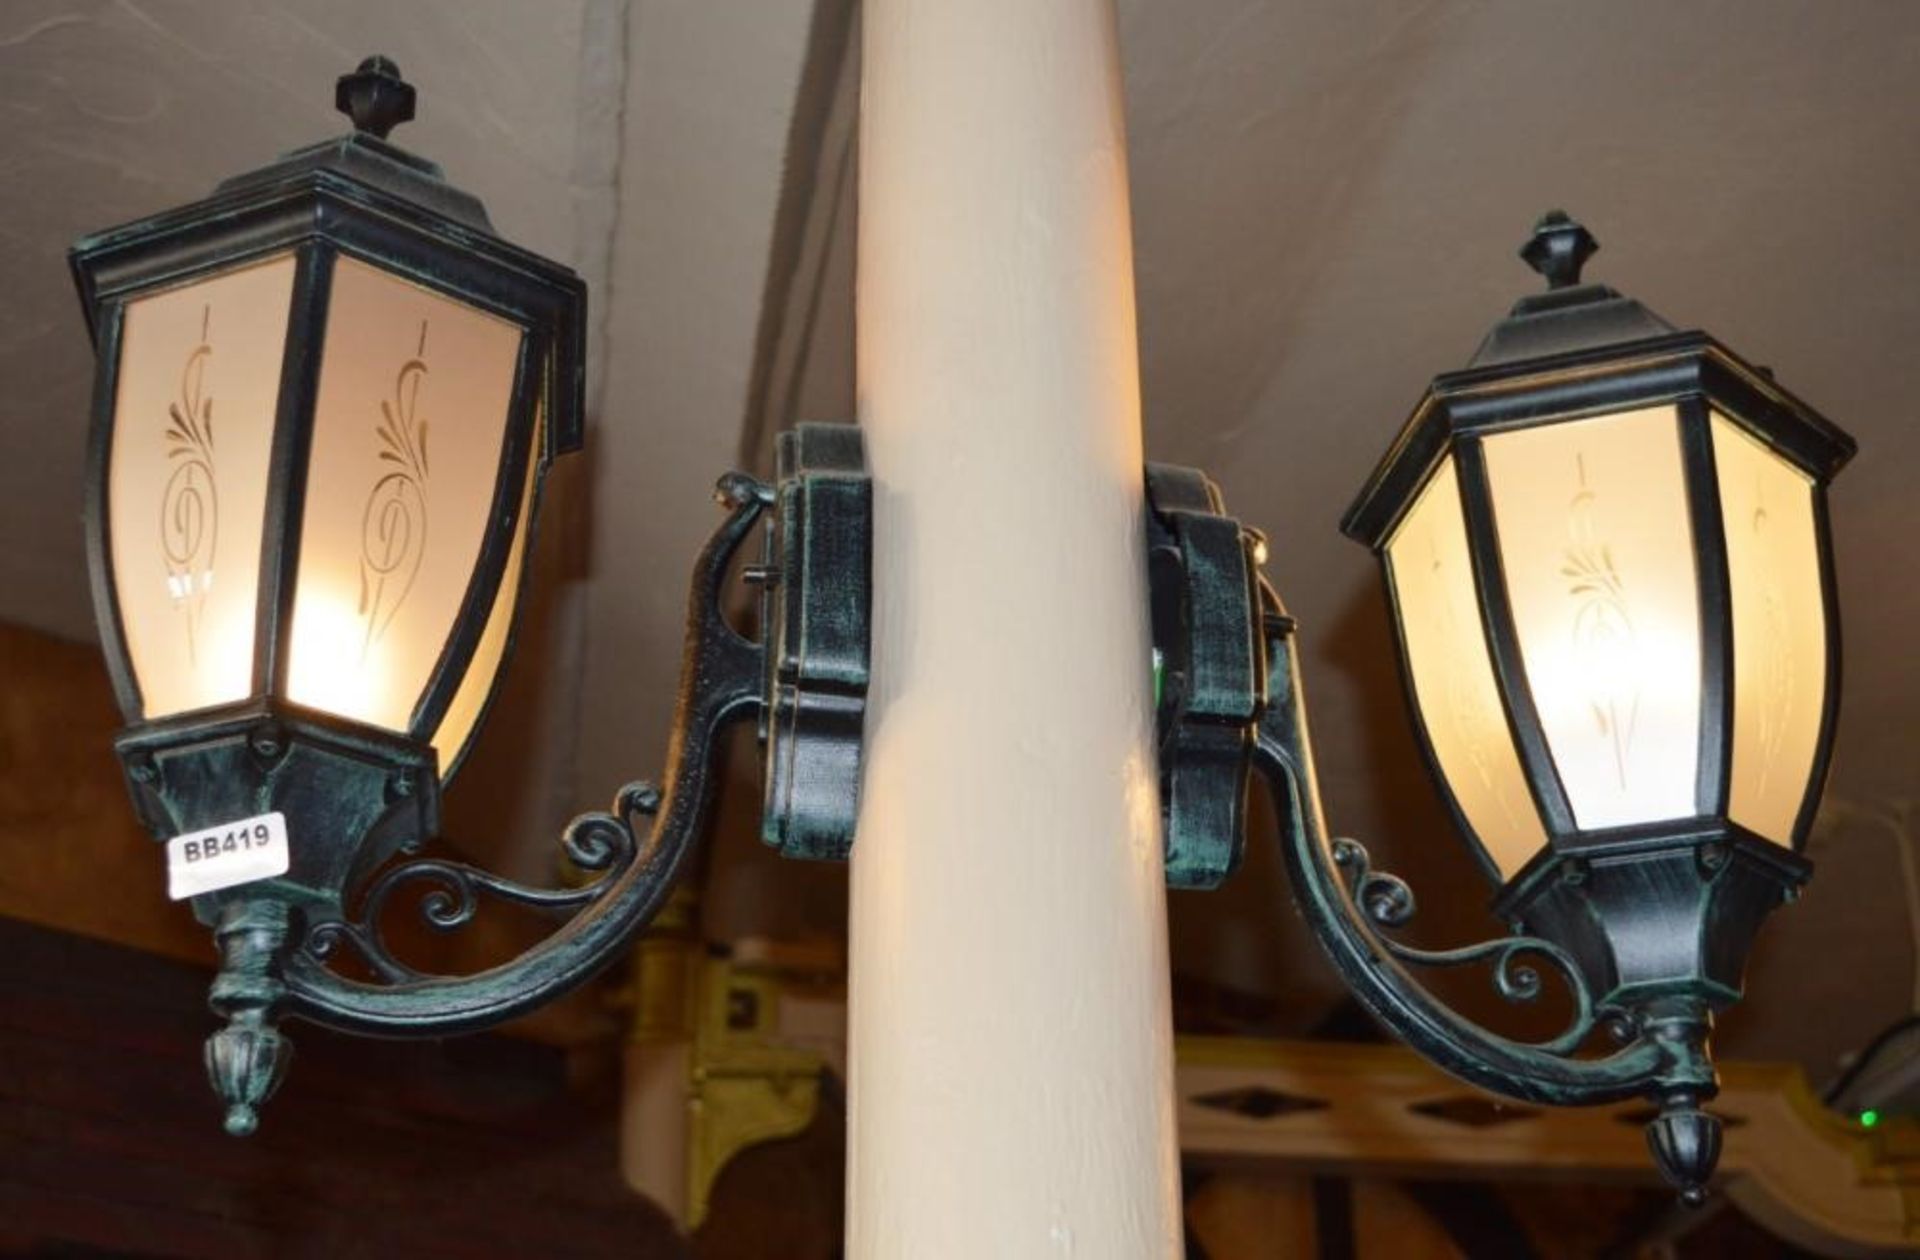 4 x Victorian Style Wall Mounted Light Fittings in Rustic Green - Ref BB419 TF- CL351 - Location: Ch